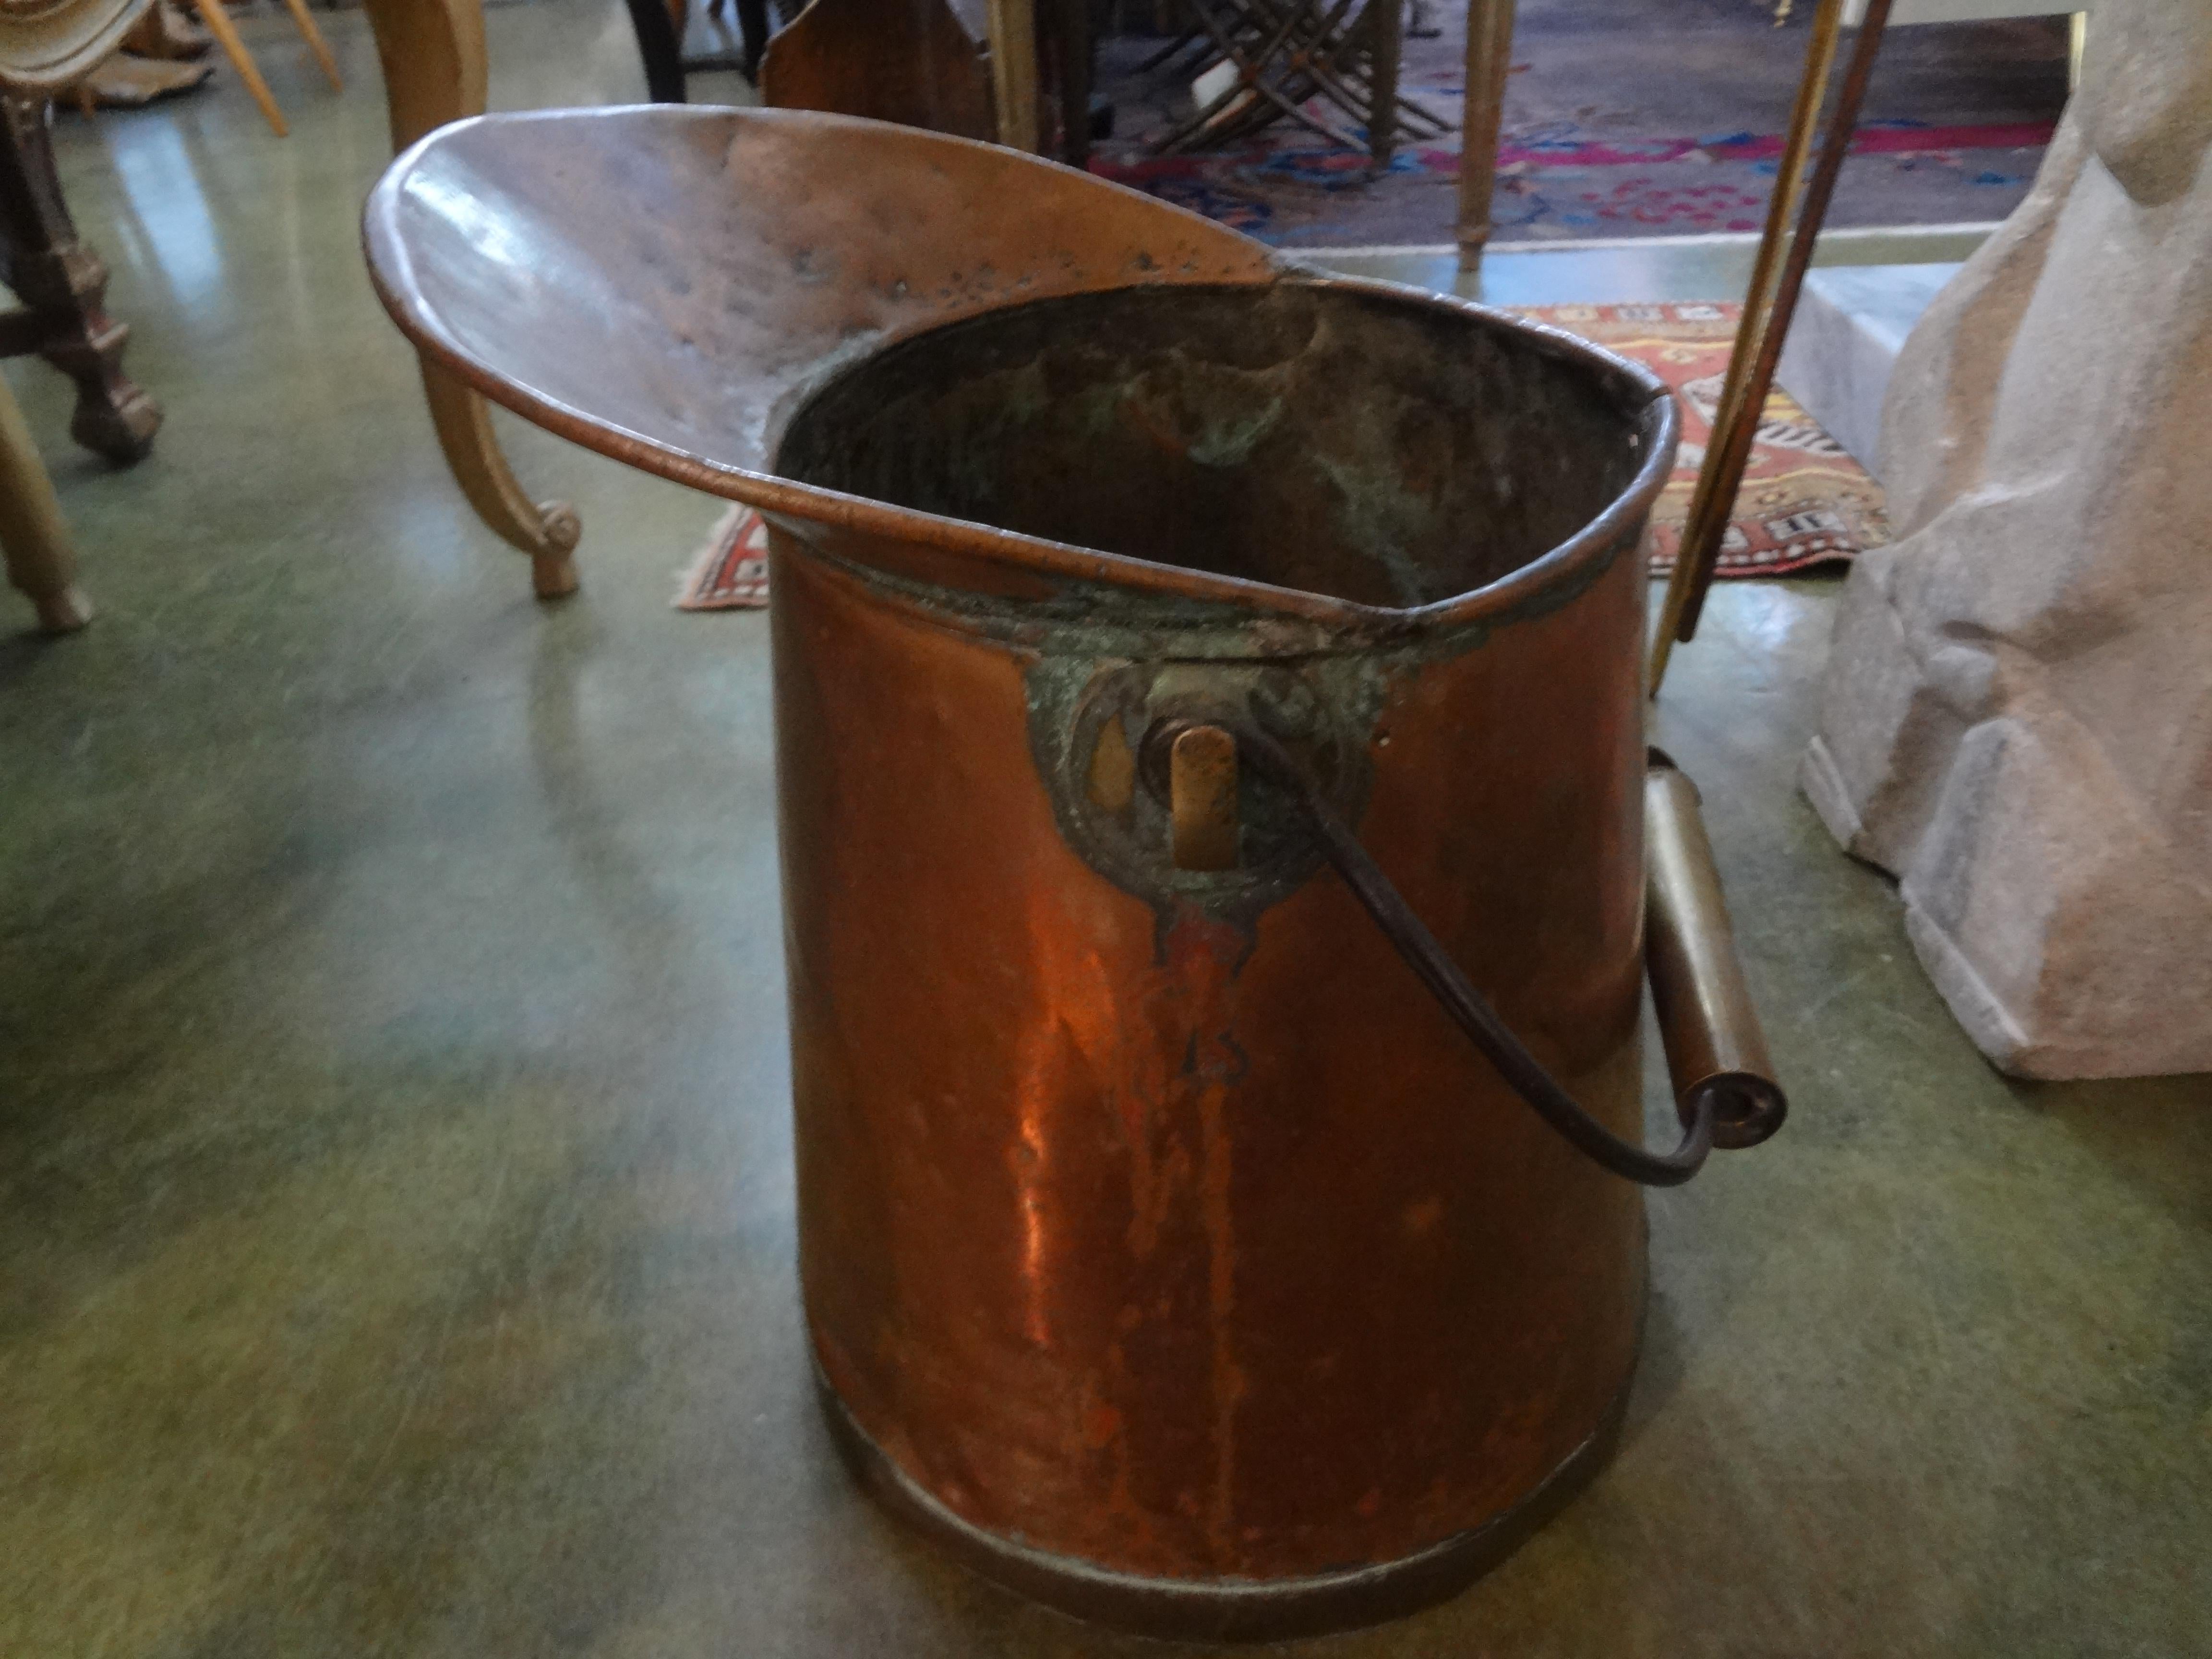 Beautiful French country copper watering pitcher with brass trim. This great French rustic copper pitcher would make a great garden accessory, indoor decorative accessory or as a vase or vessel for flowers.